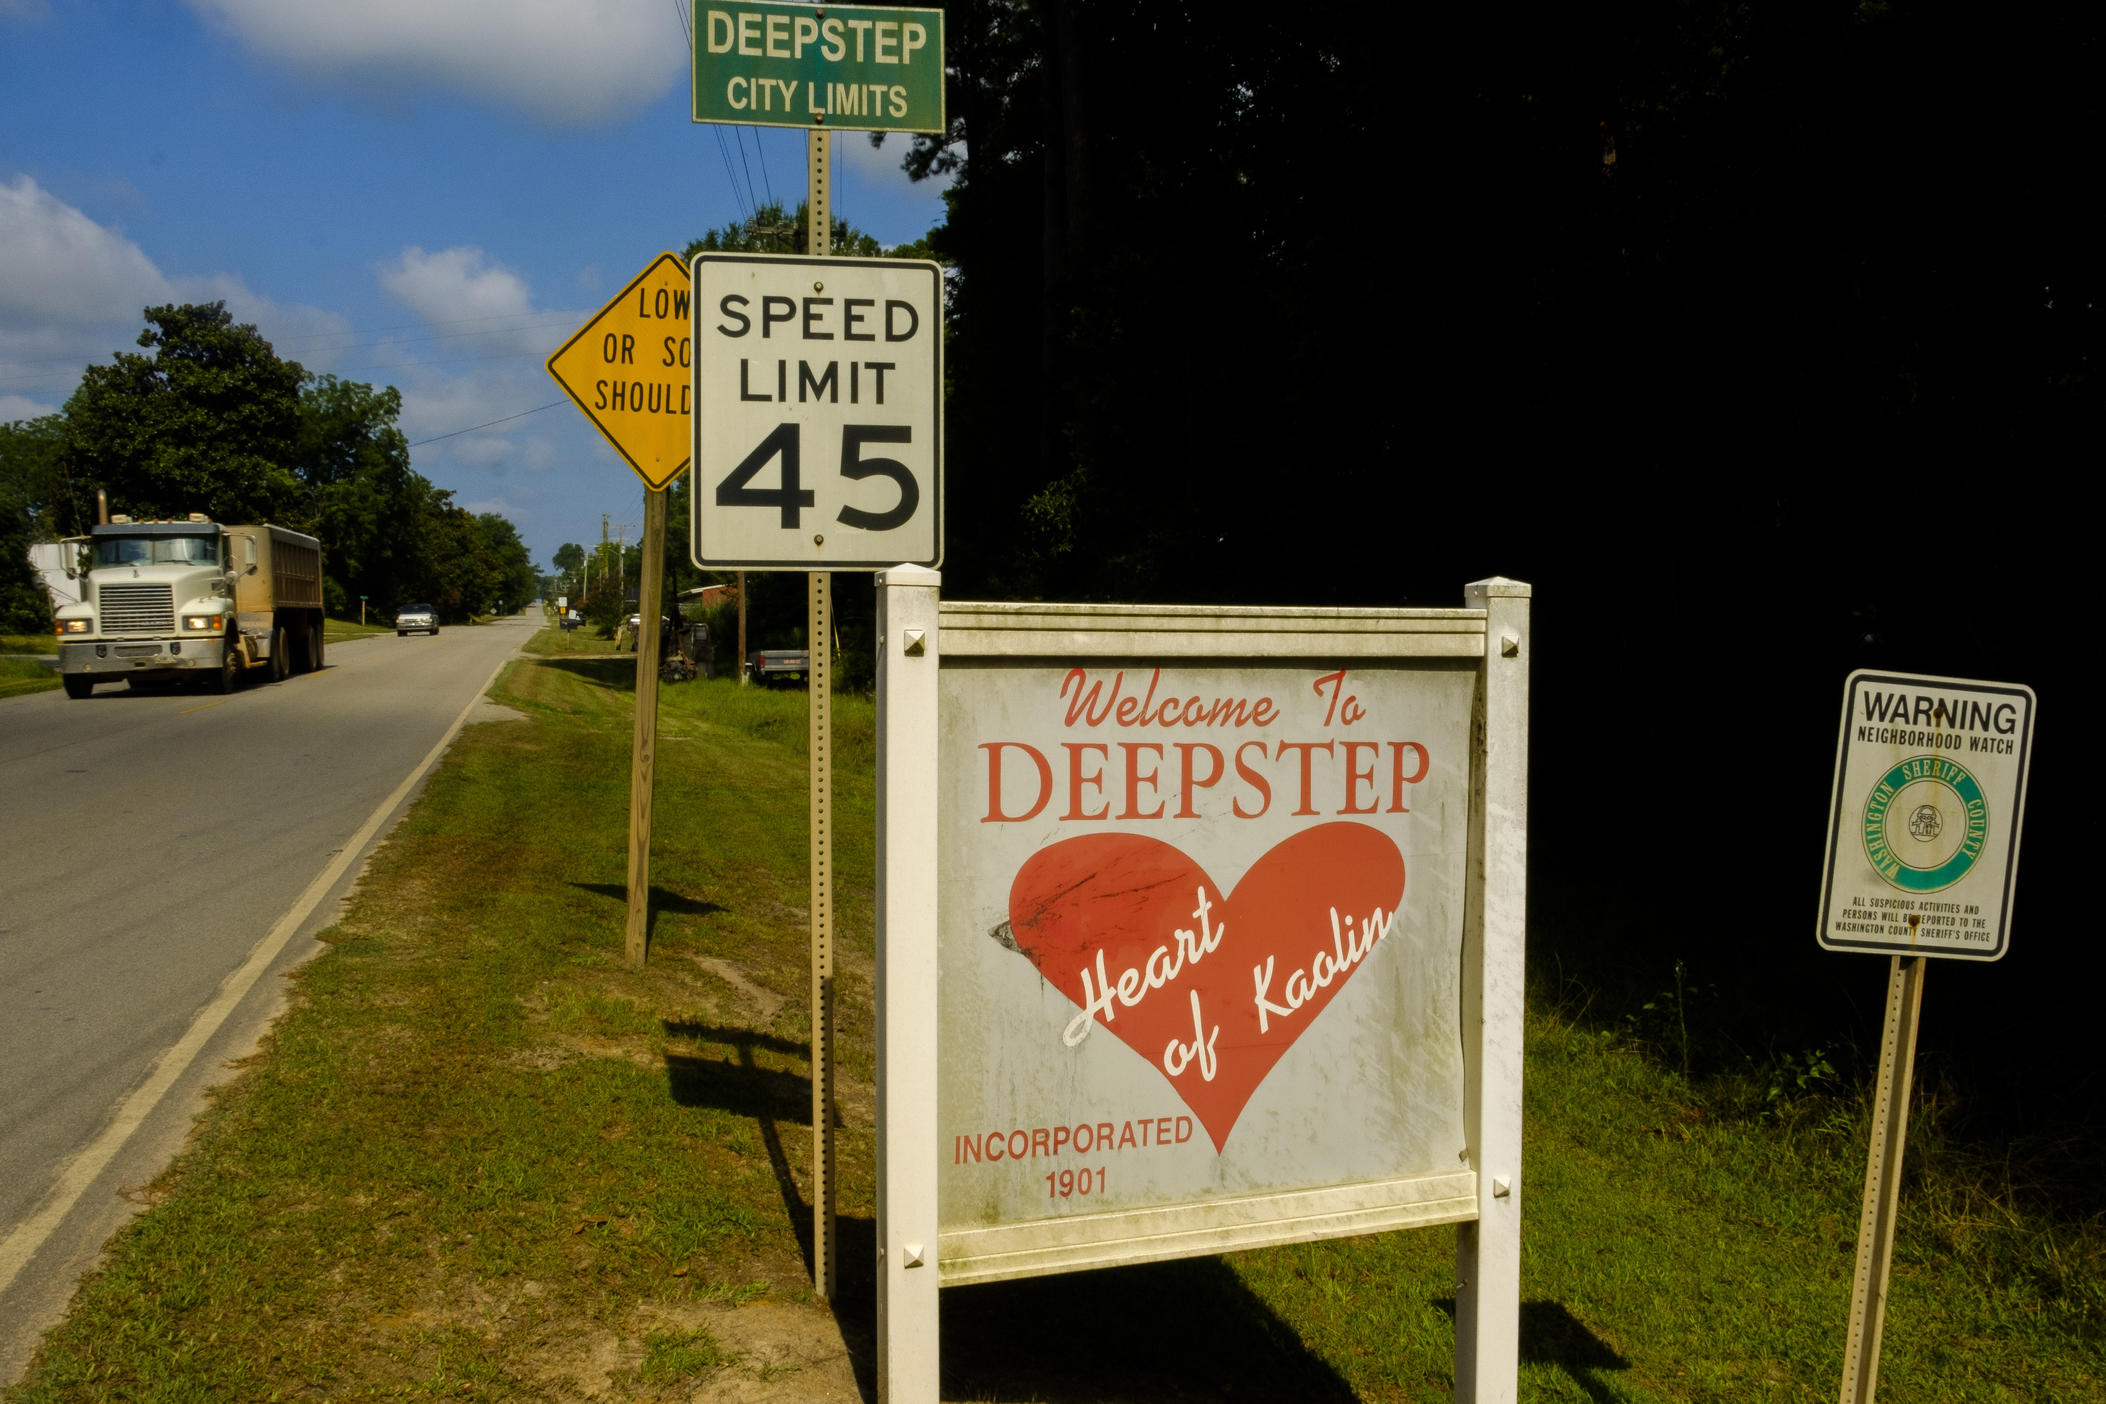 The city limits of Deepstep in Washington County, a few miles from where Eurie Martin was killed by sheriff's deputies in 2017.  